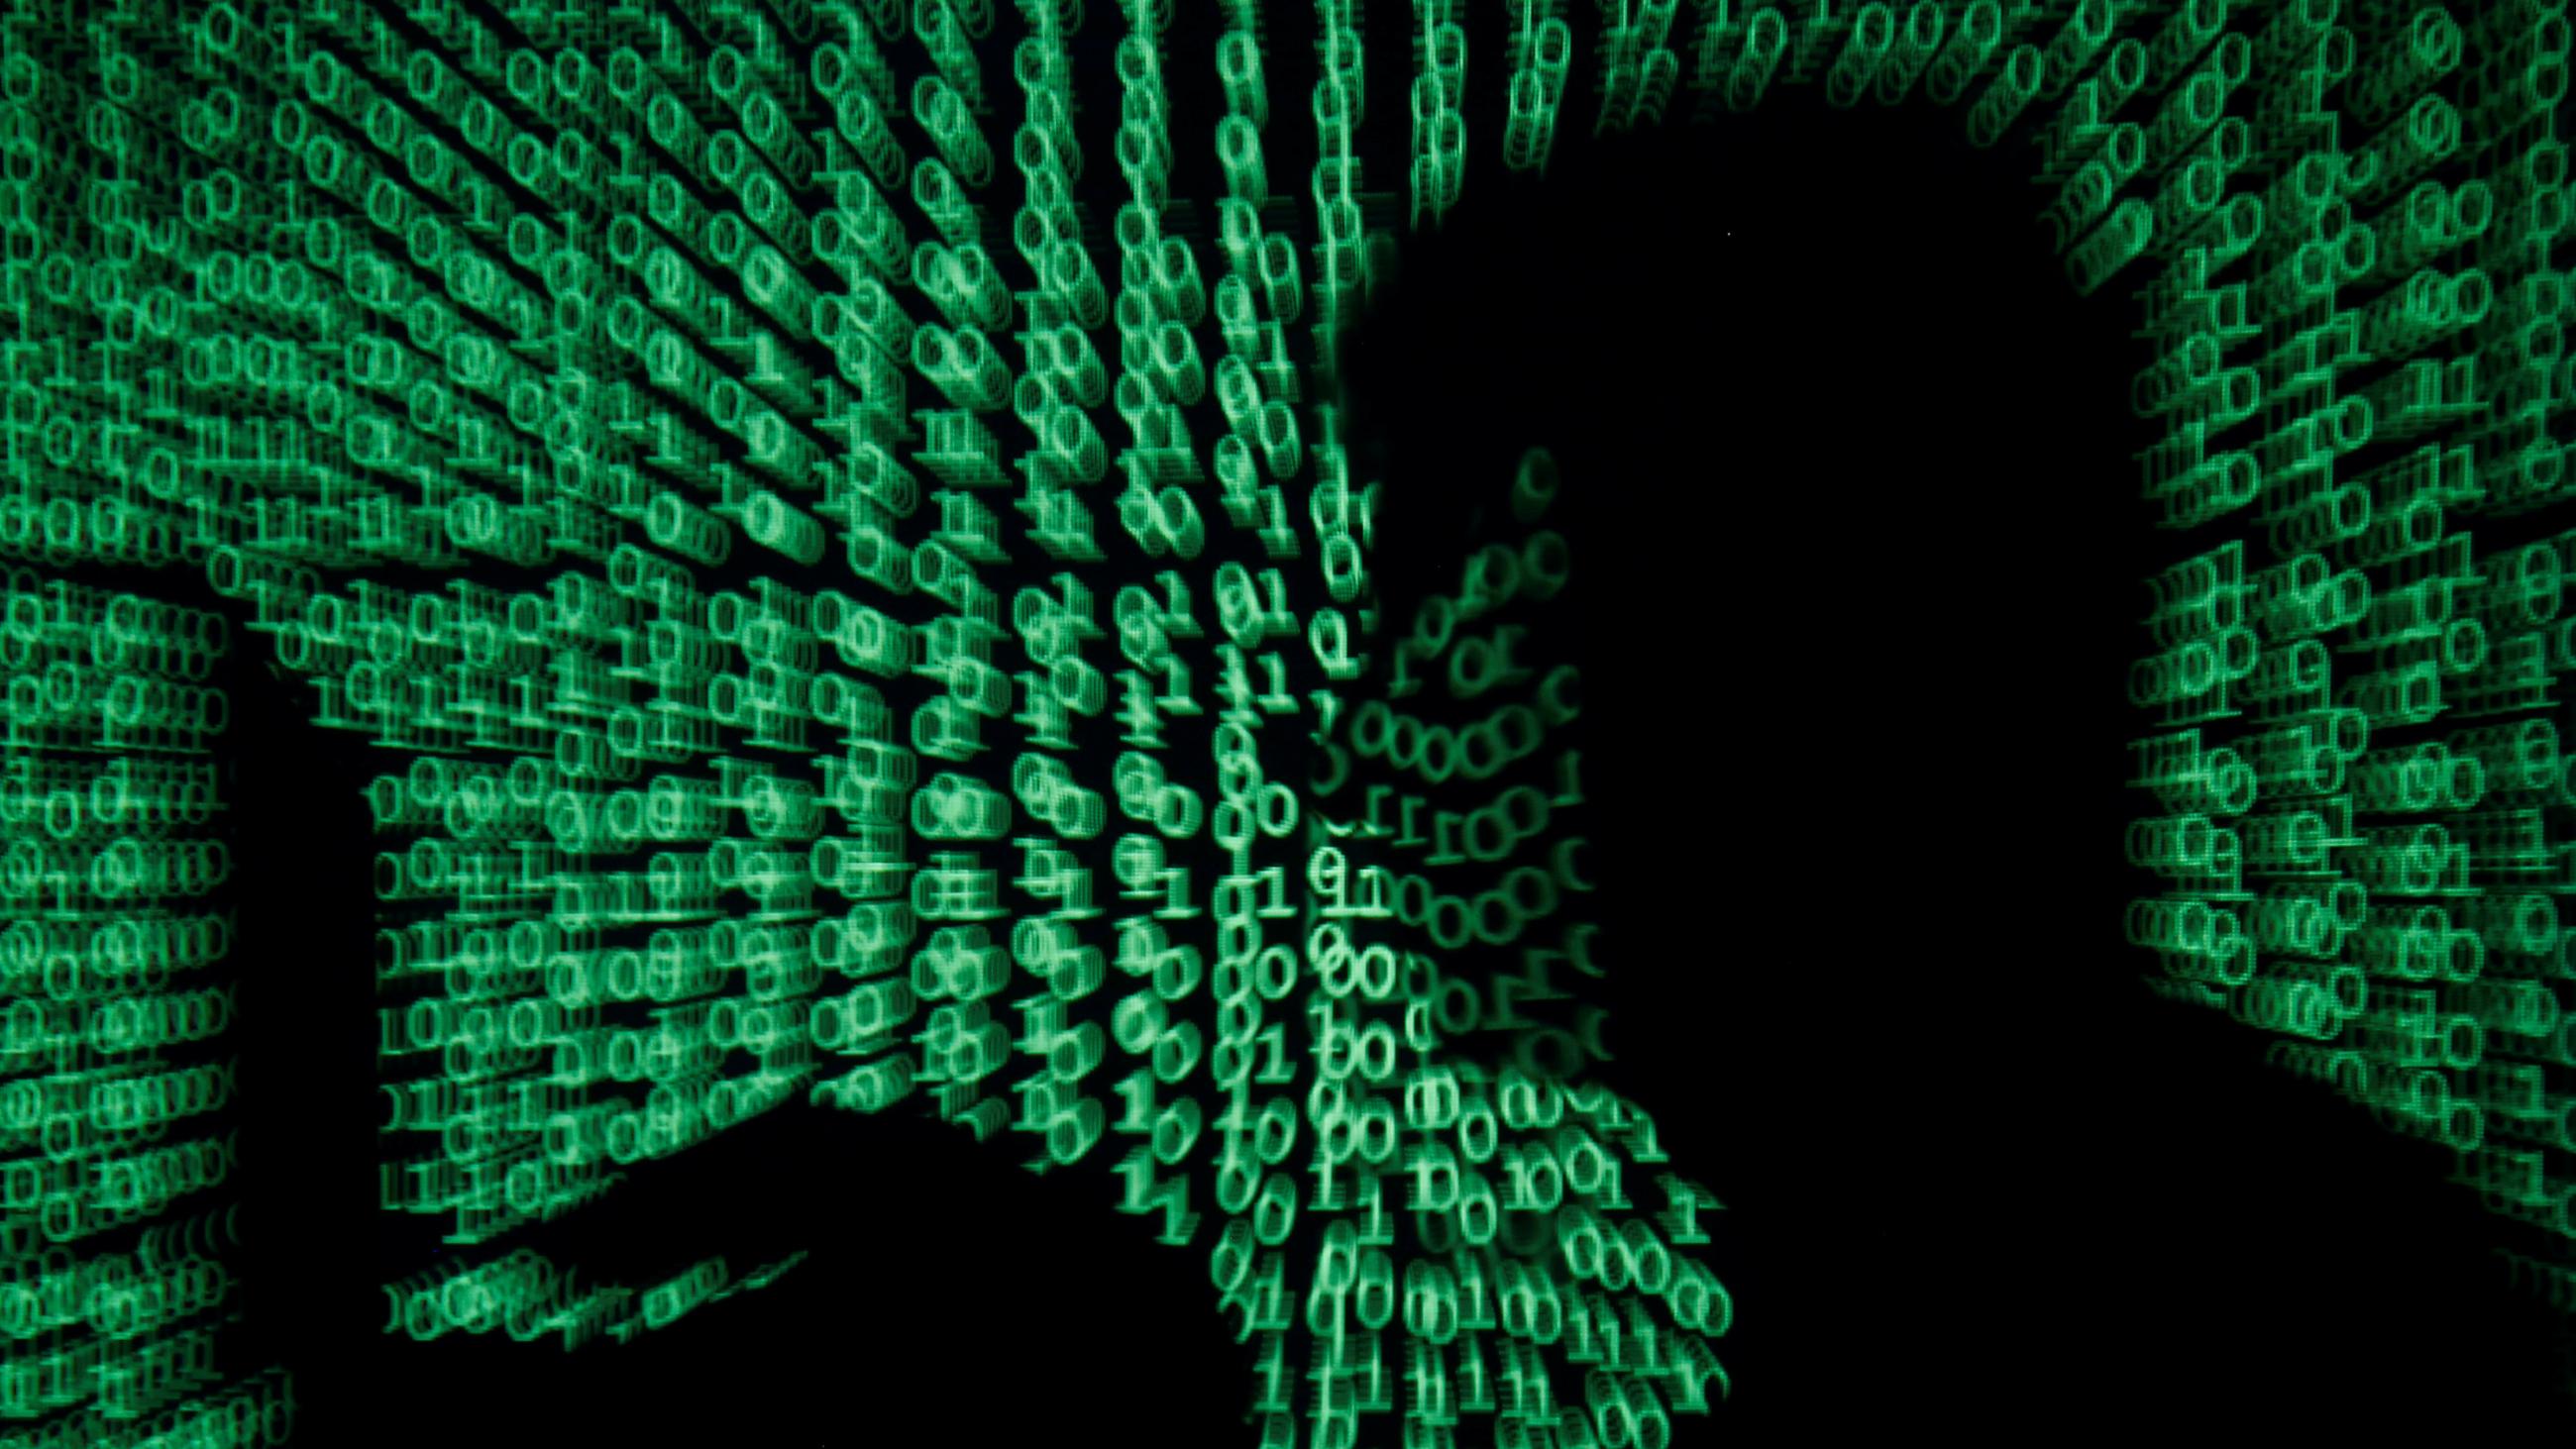 the image shows the silhouette of a man on a laptop with green ones and zeroes, reminiscent of the film "The Matrix" projected over the image. 